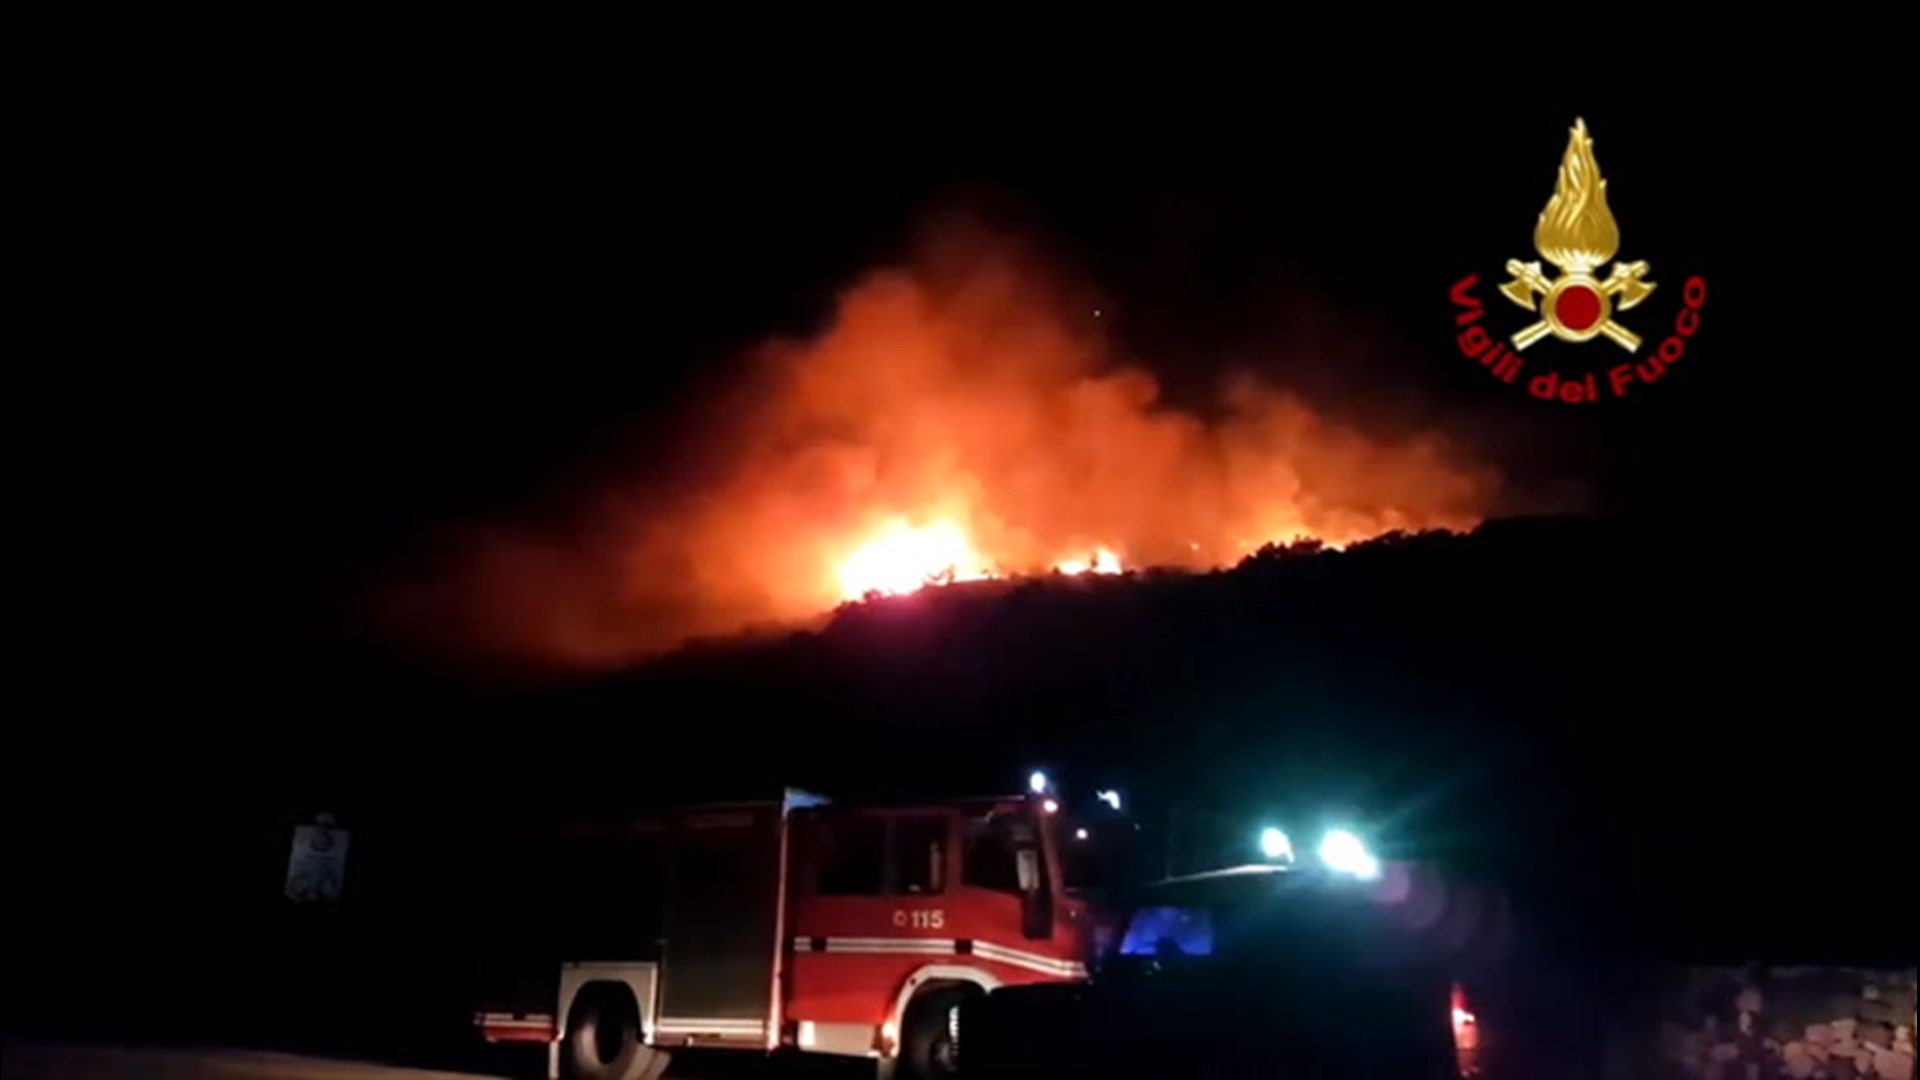 Fire crews used helicopters to battle a wildfire raging in Castiglione di Sicilia, Italy, on Aug. 20. Multiple buildings were reportedly threatened by the wildfire.